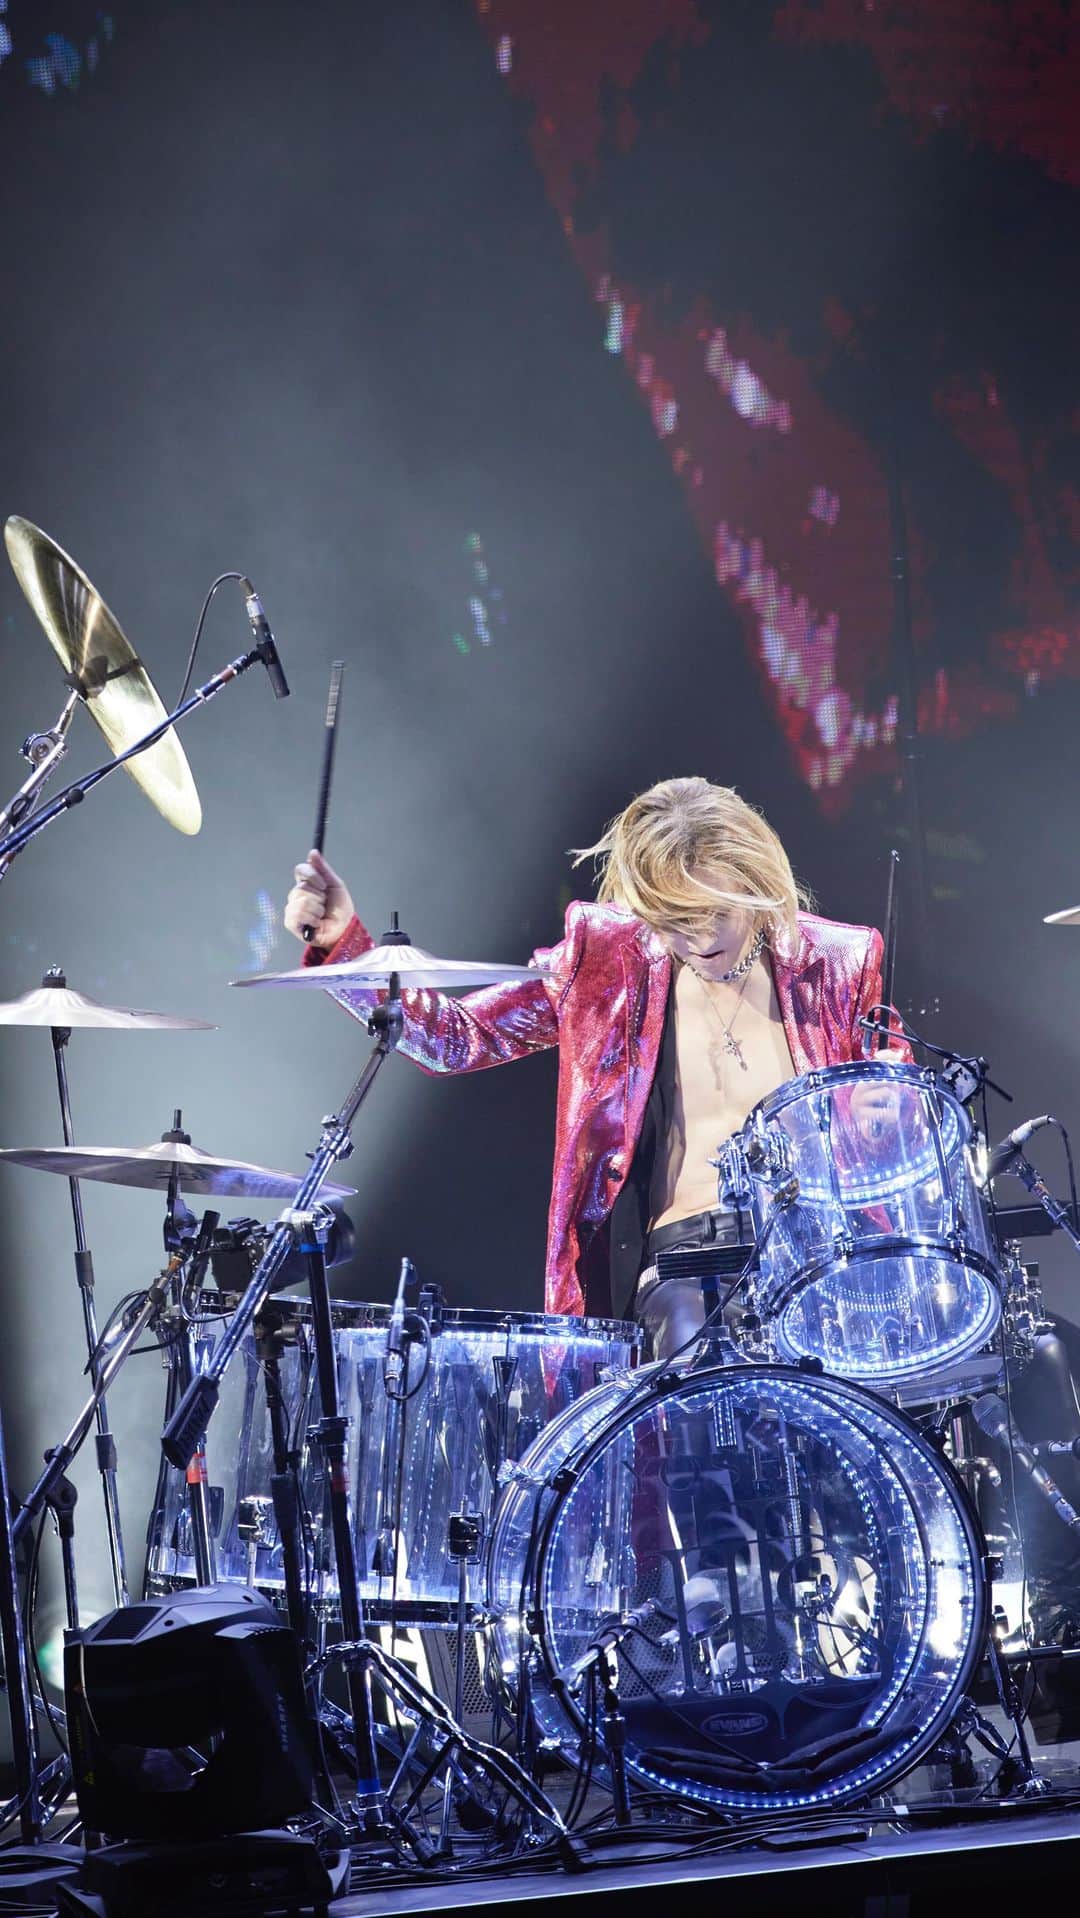 YOSHIKIのインスタグラム：「Coming soon too?! Drums & Piano.  Yoshiki  @xjapanofficial @thelastrockstars  #yoshiki #xjapan #thelastrockstars #drums #piano #fans #nyc #NewYork #DrumSolo」